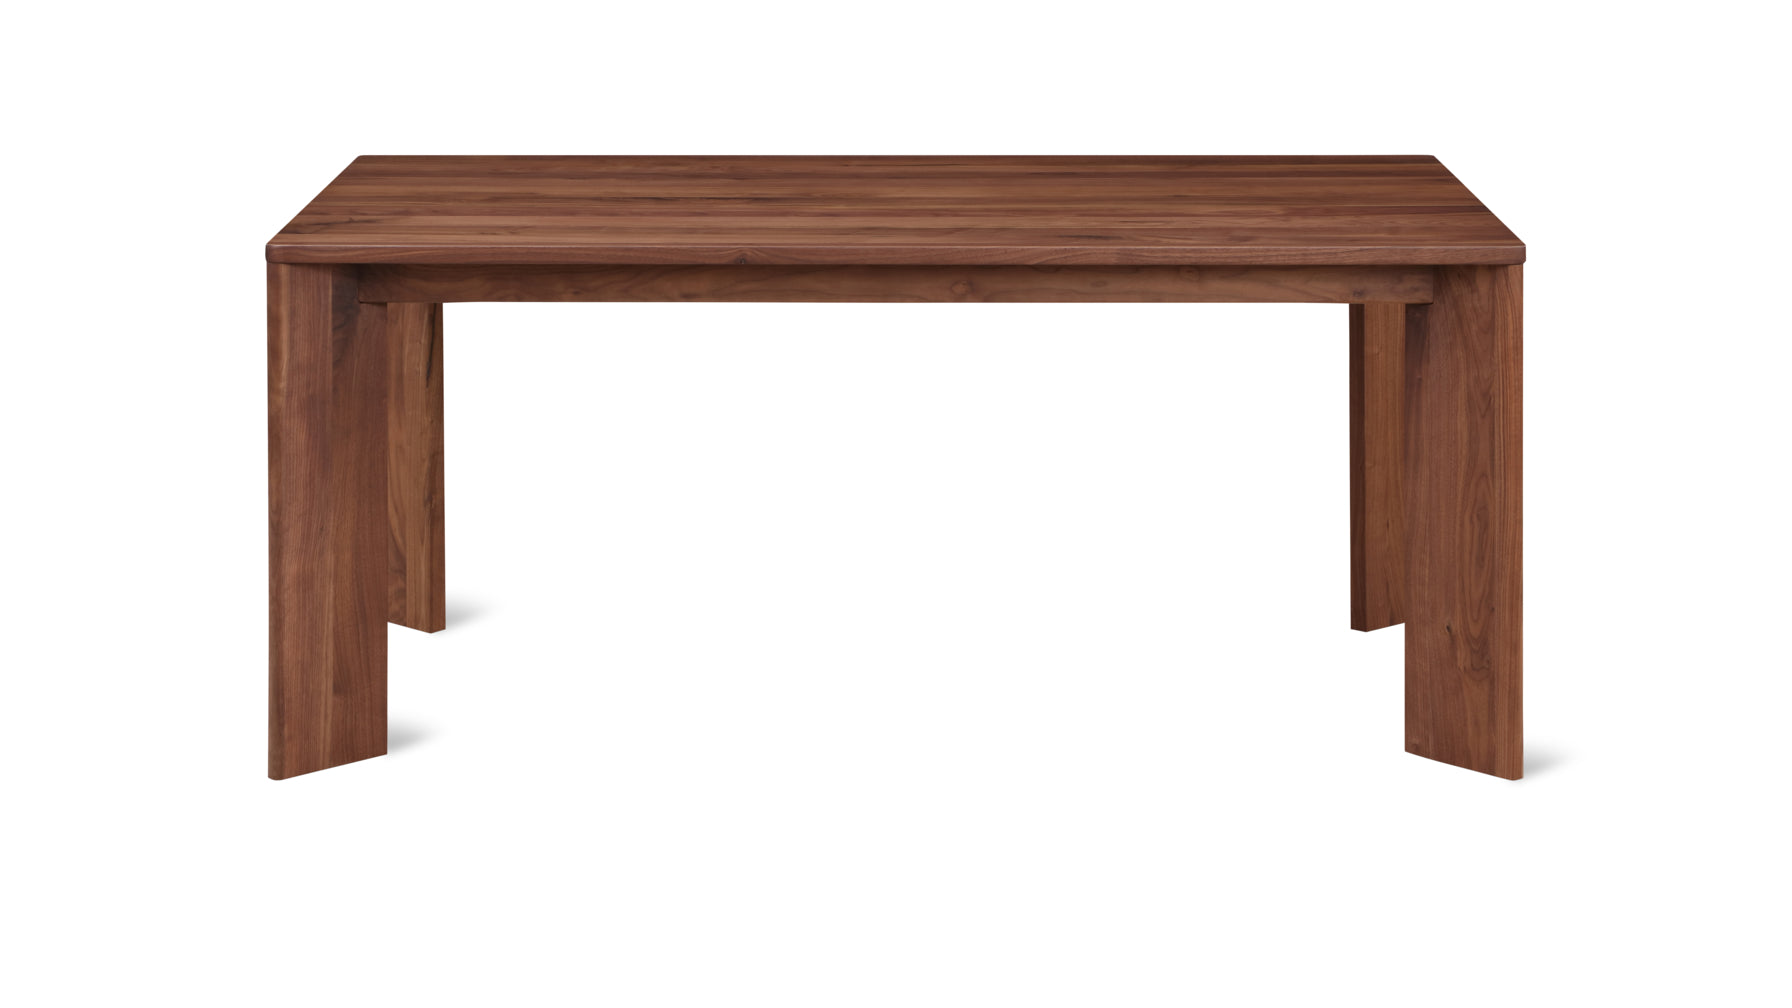 Frame Dining Table, Seats 4-6 People, American Walnut - Image 2